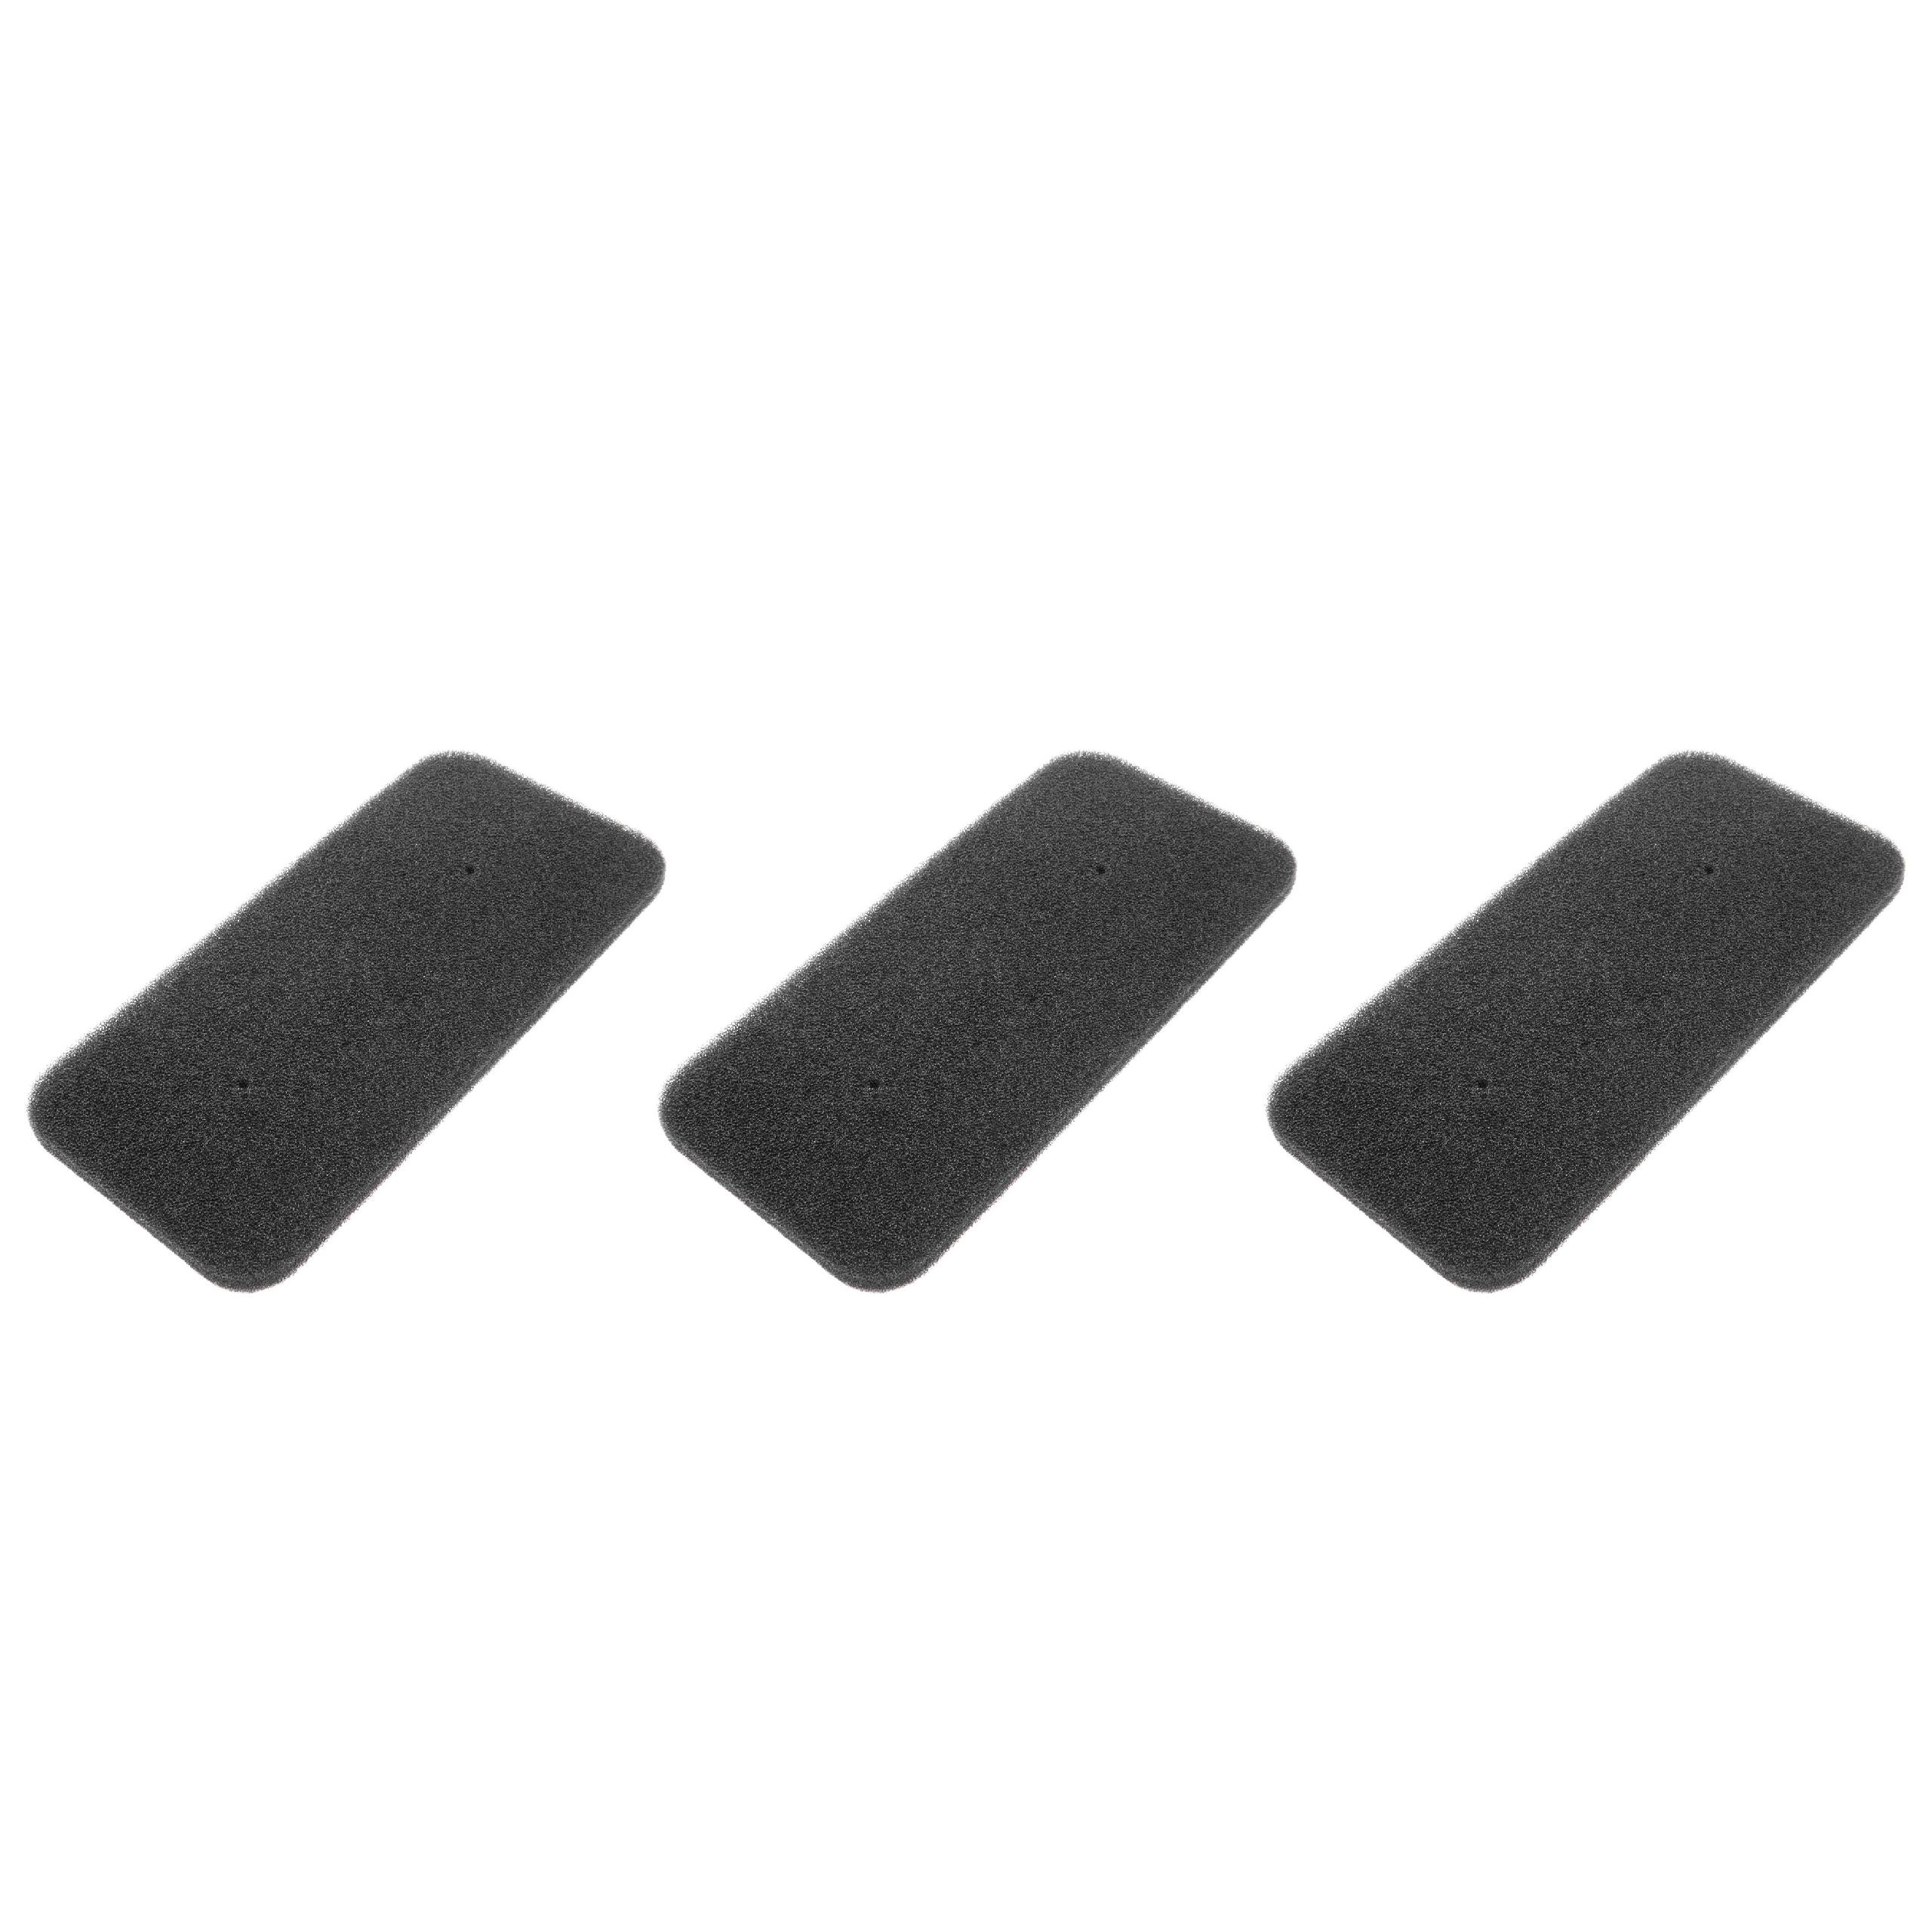 Filter Set (3x sponge filter) as Replacement for Candy 40006731 Tumble Dryer etc.